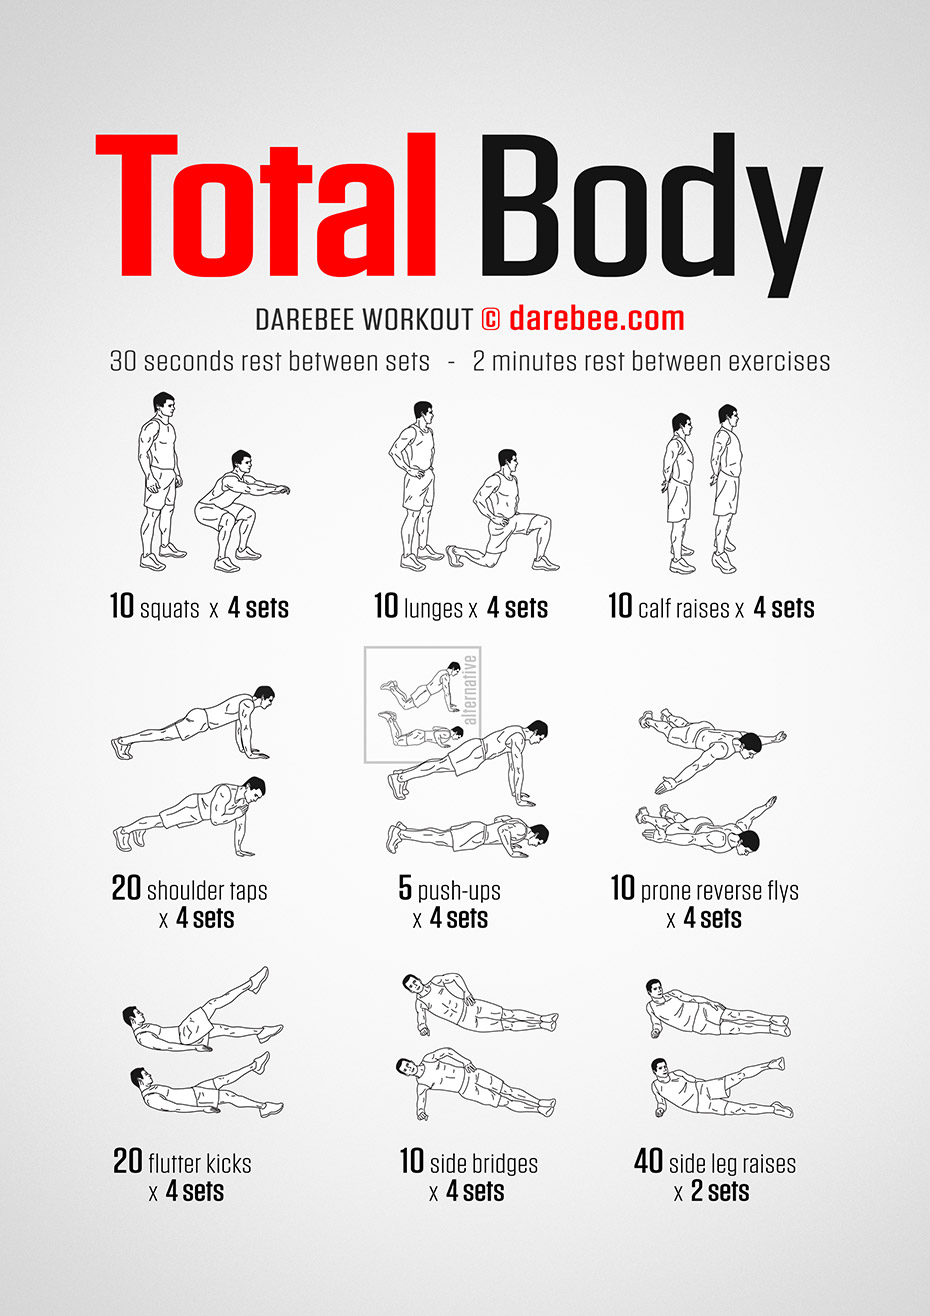 Whole Body Workout For Women